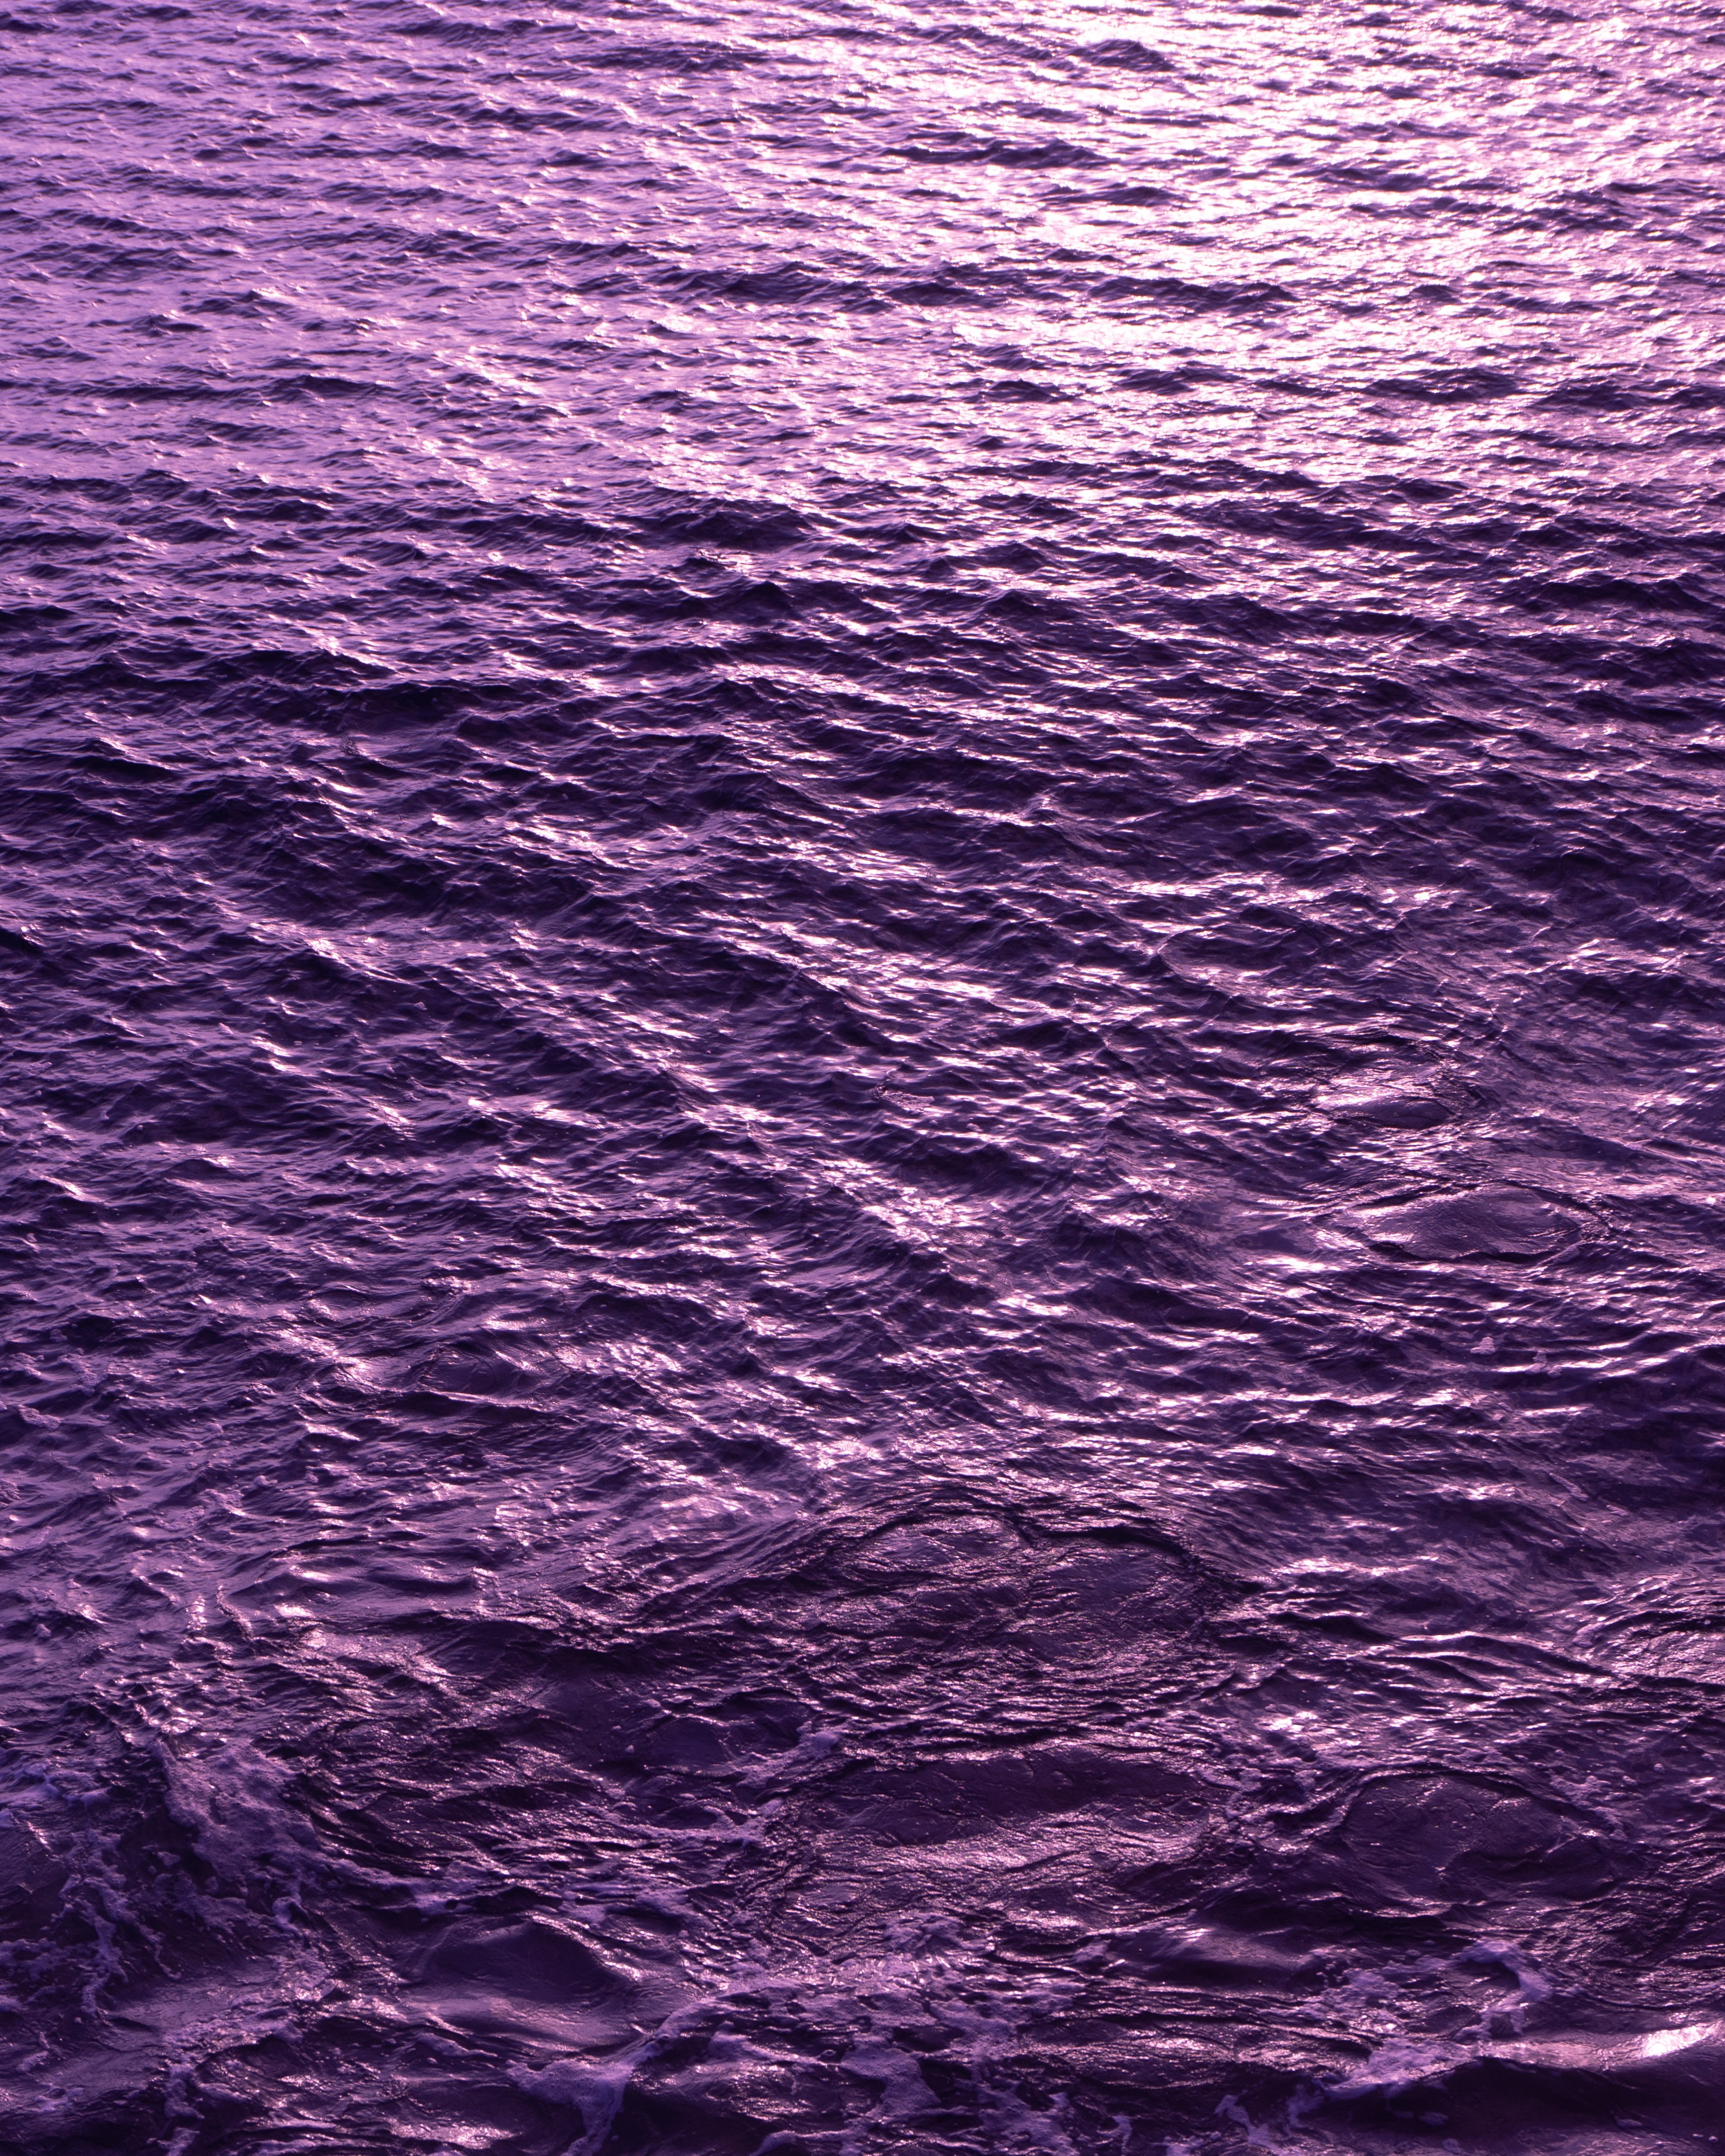 purple, surface, water, nature, waves, violet, ripples, ripple cellphone